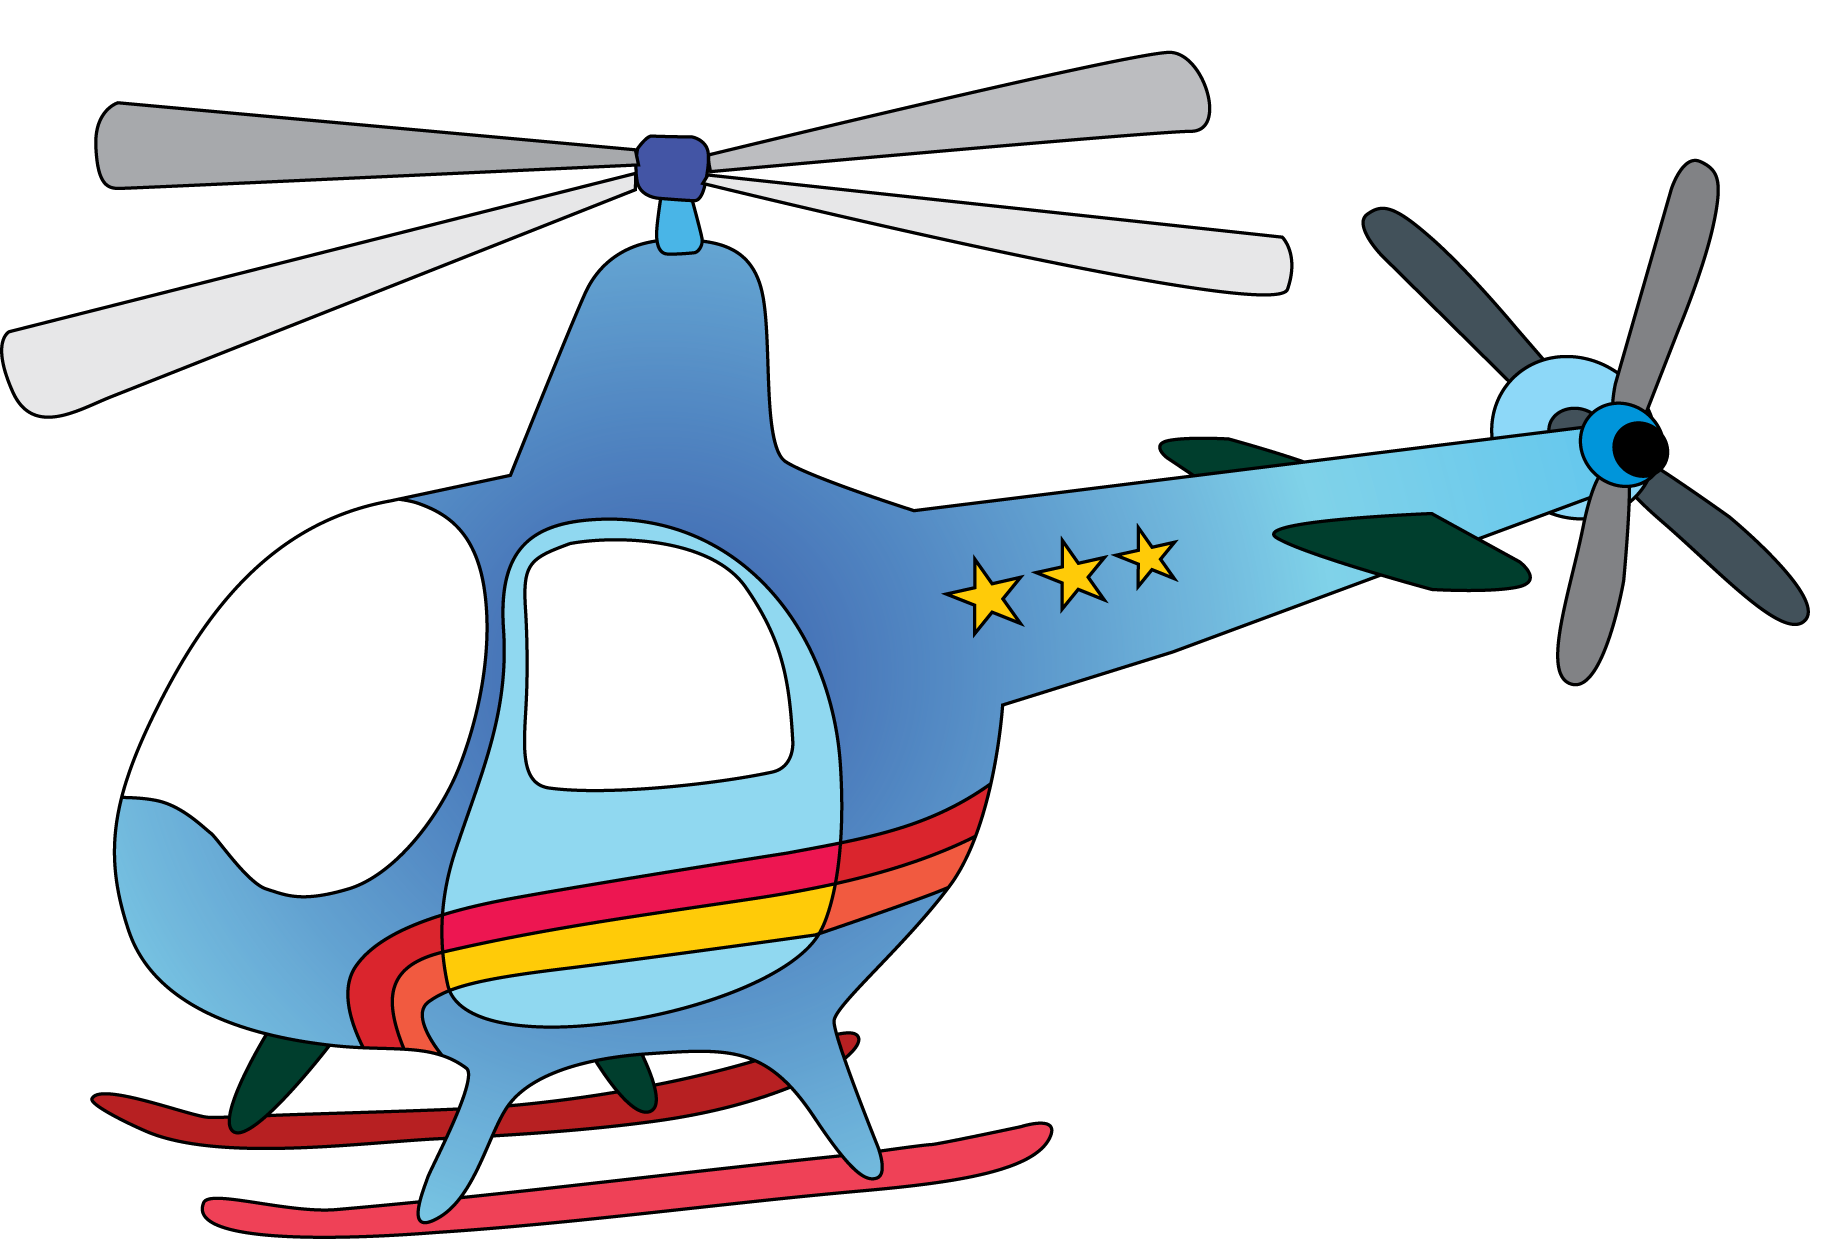 Clip Art Helicopter